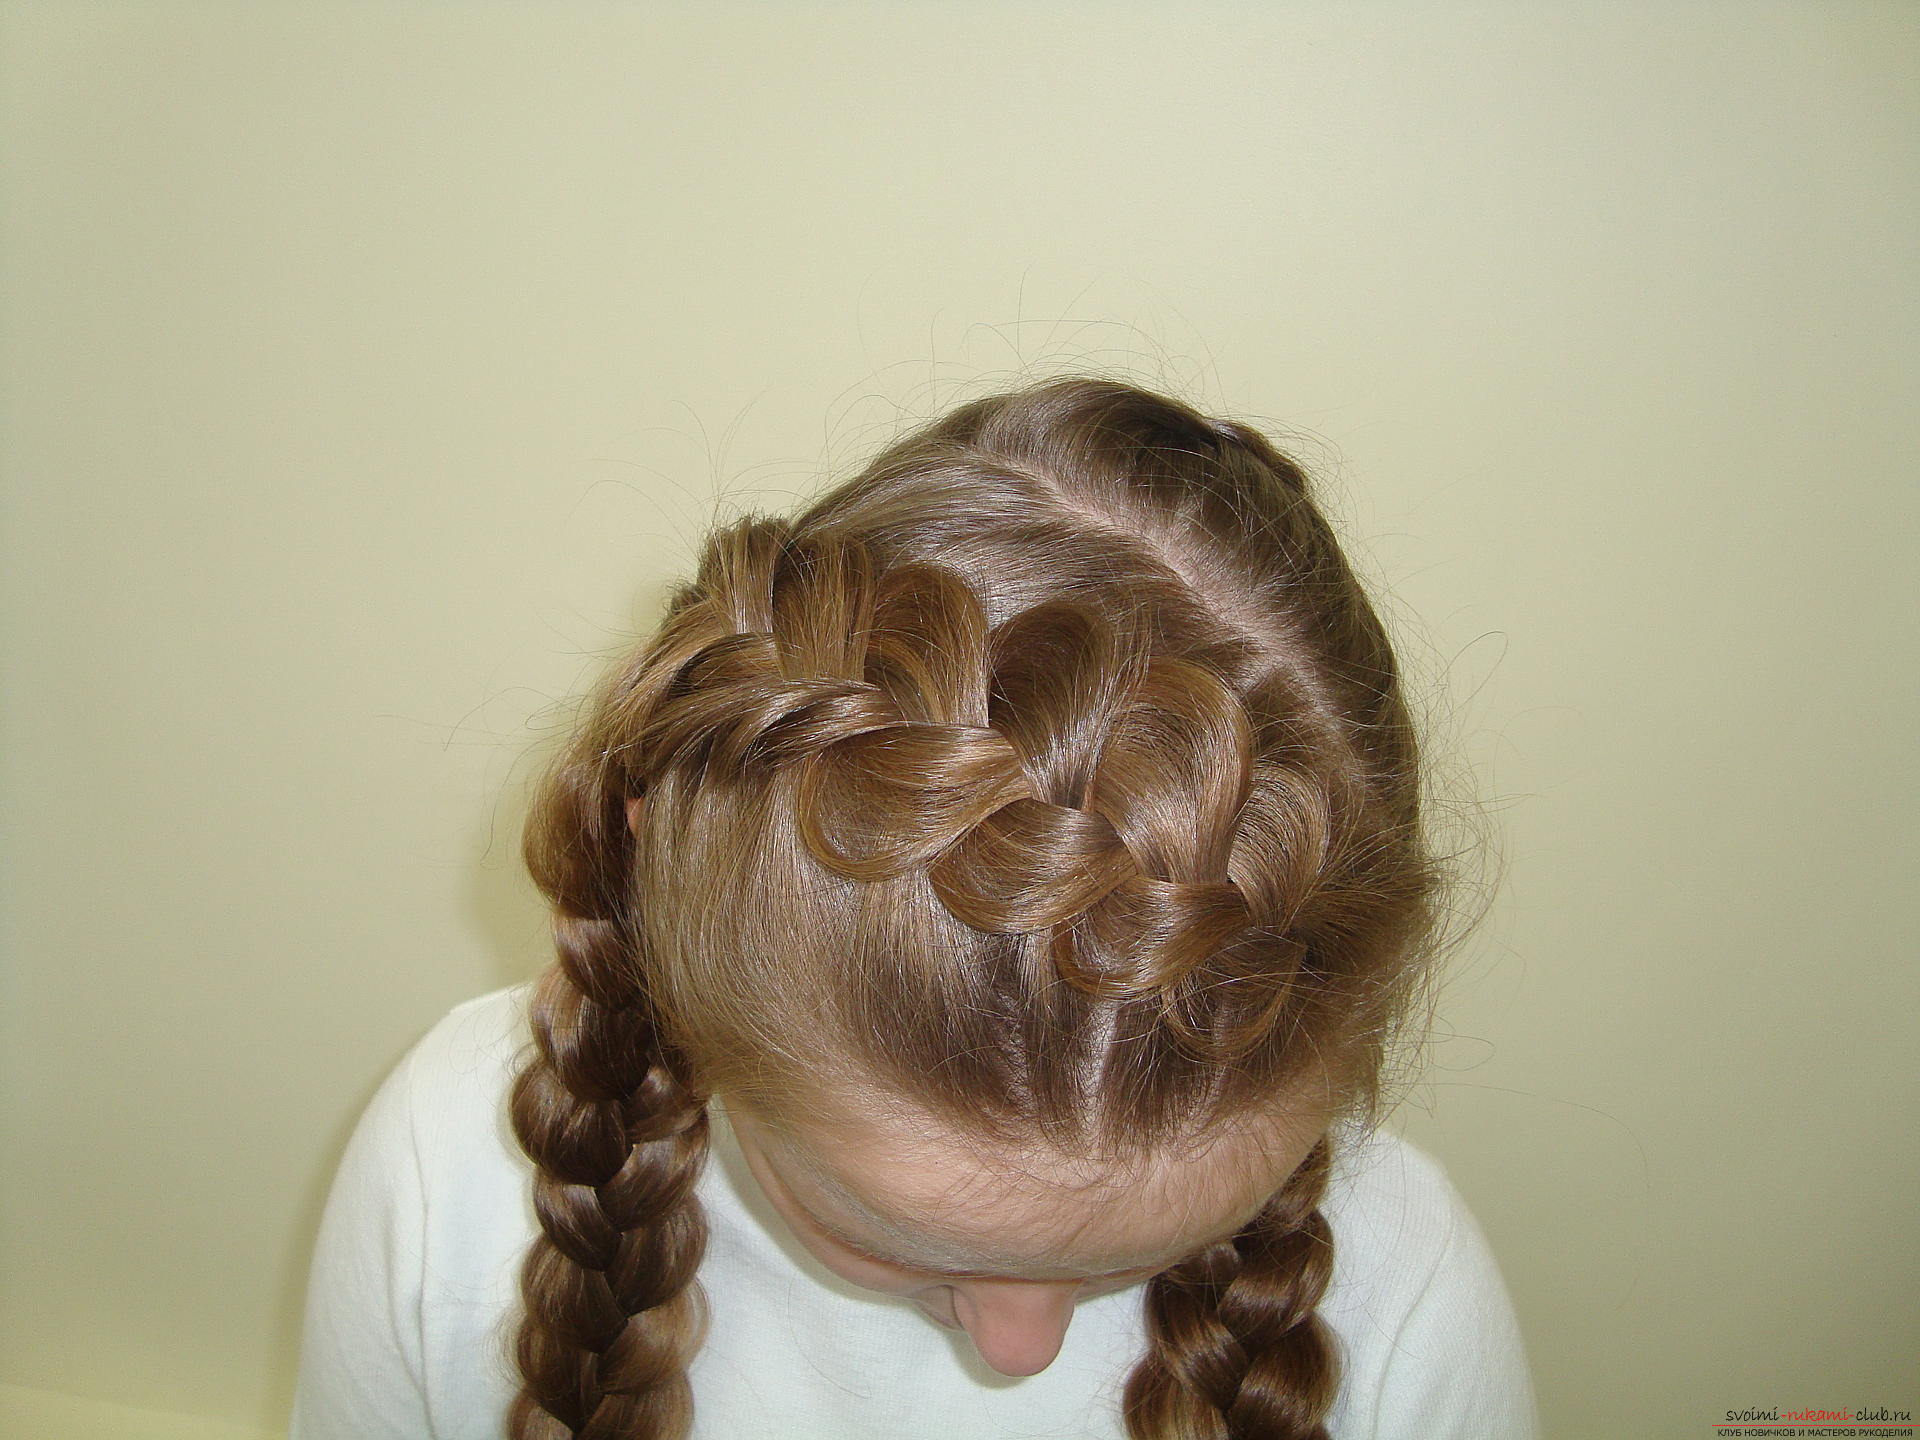 Photo to the lesson on the weaving of French braids. Photo Number 14